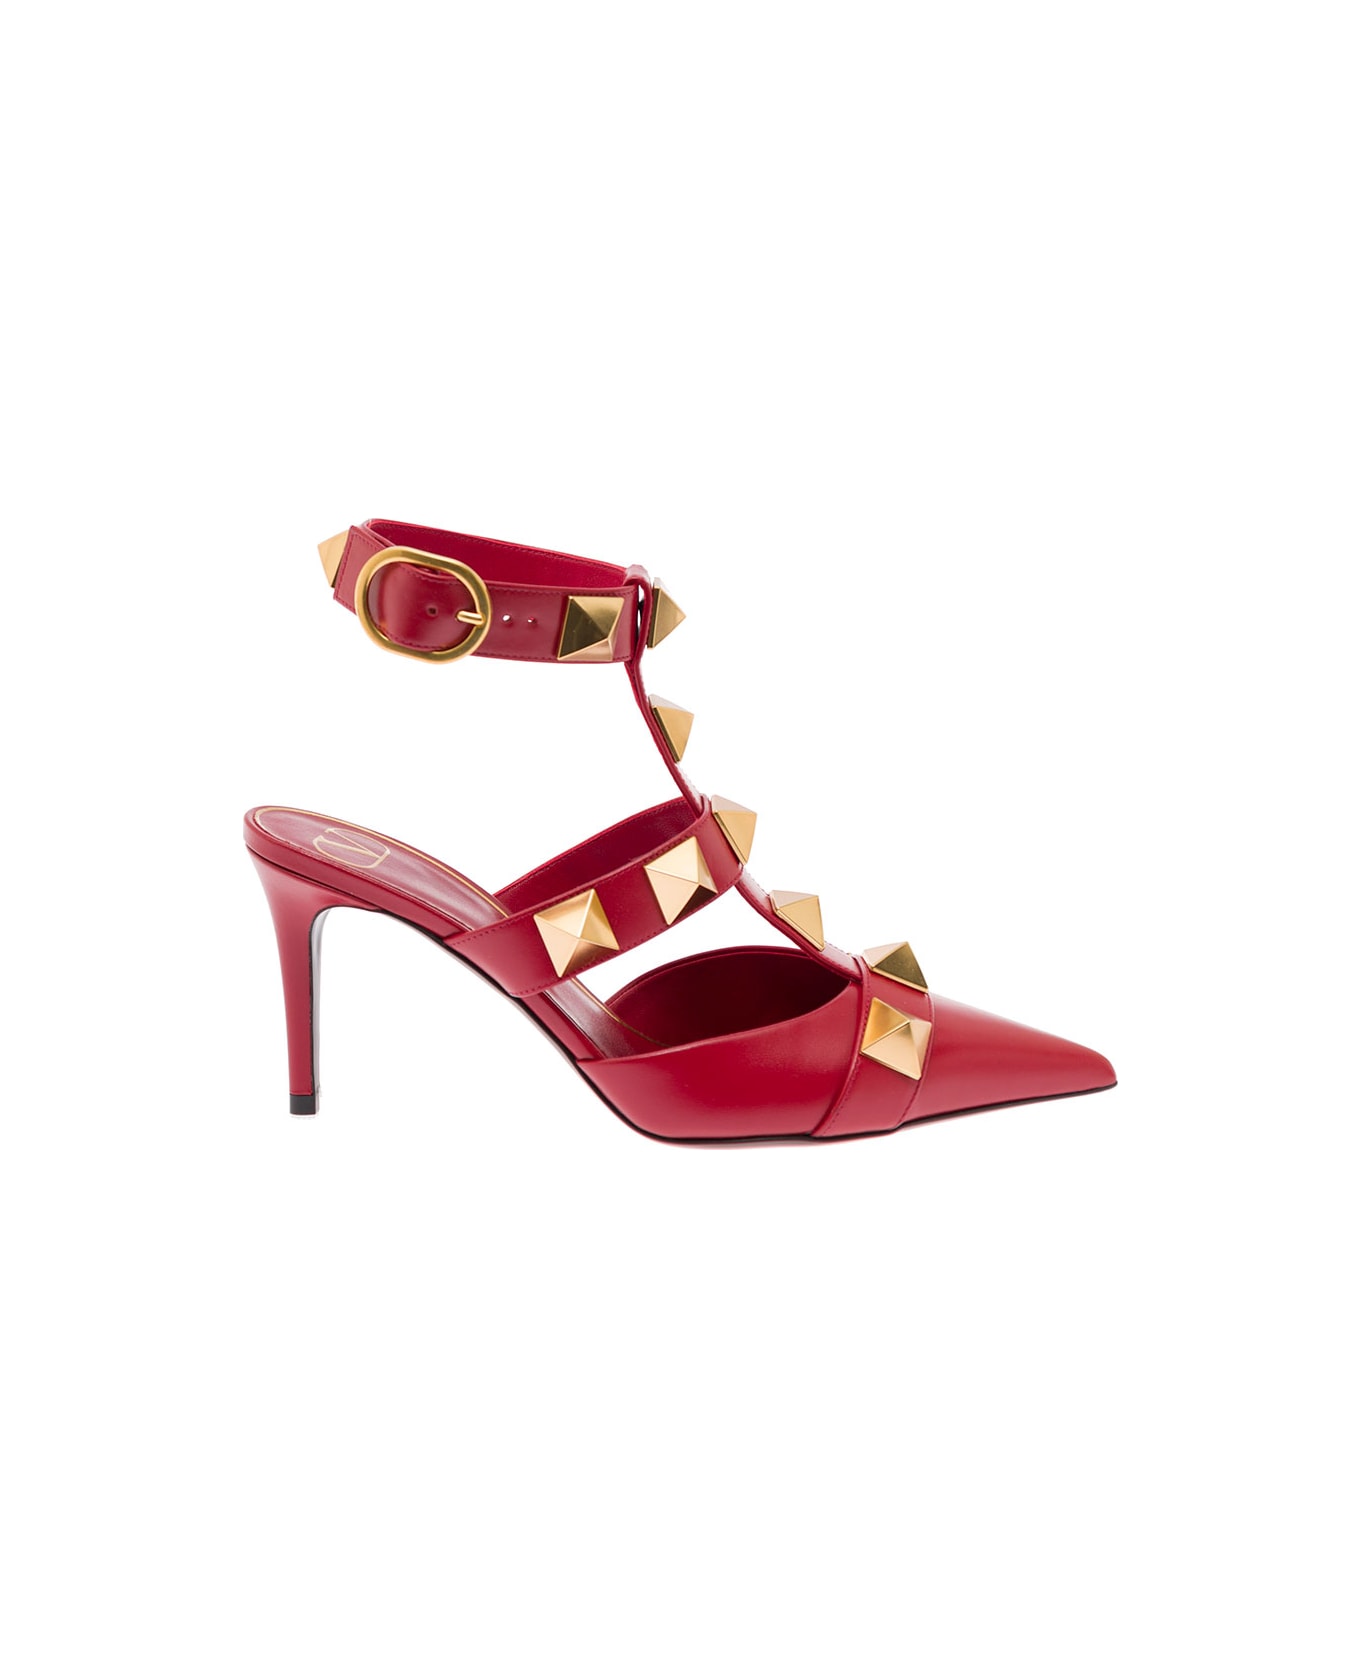 Valentino Garavani Woman's  Red Leather Roman Stud Pumps  With Studs - Red